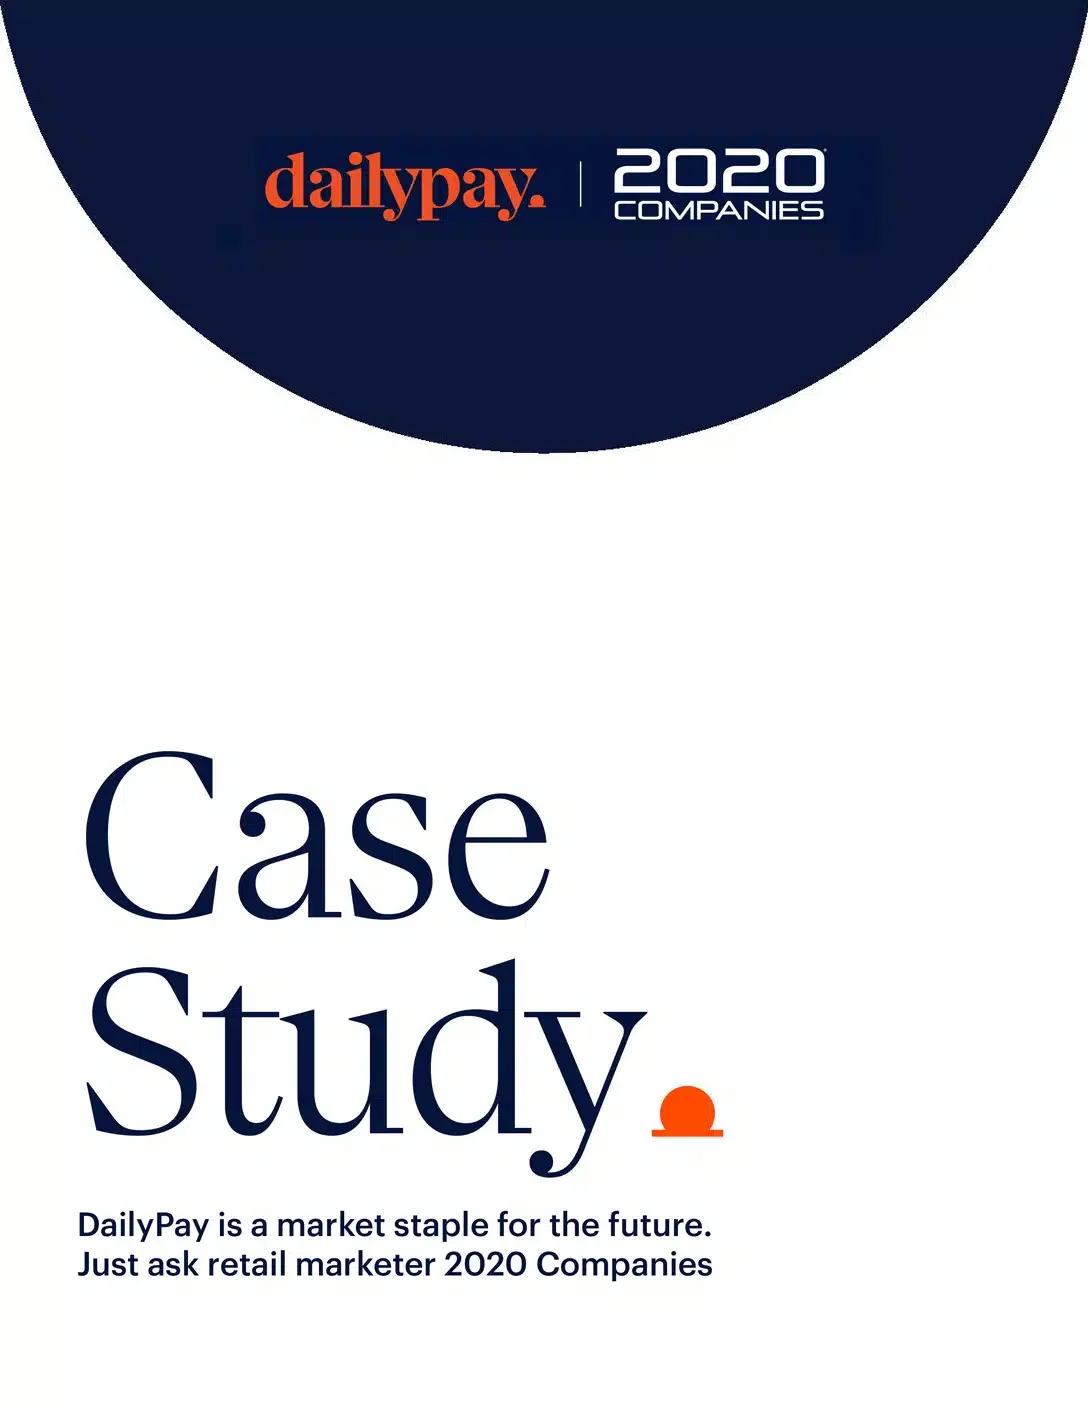 Cover image of a case study by DailyPay and 2020 Companies, stating 'DailyPay is a market staple for the future. Just ask retail marketer 2020 Companies.'.